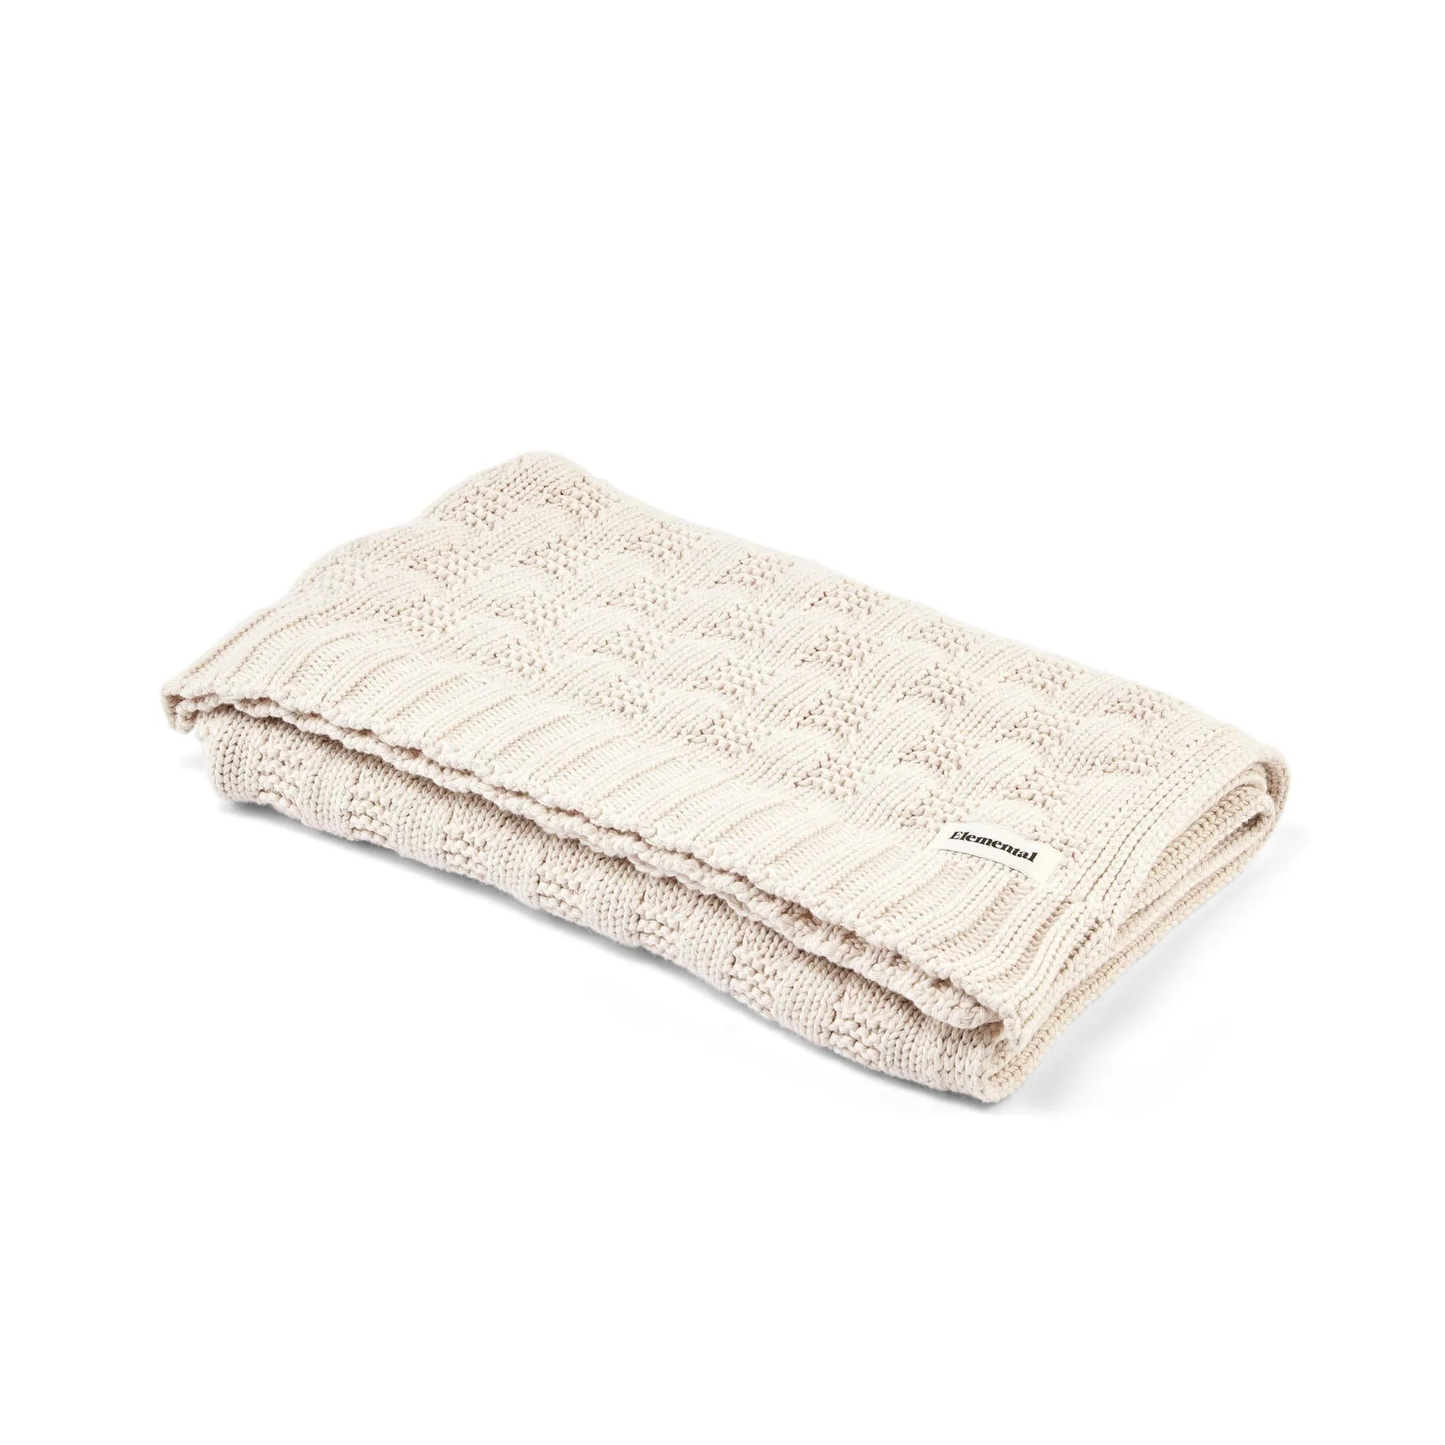 Mamas & Papas Knitted Blanket